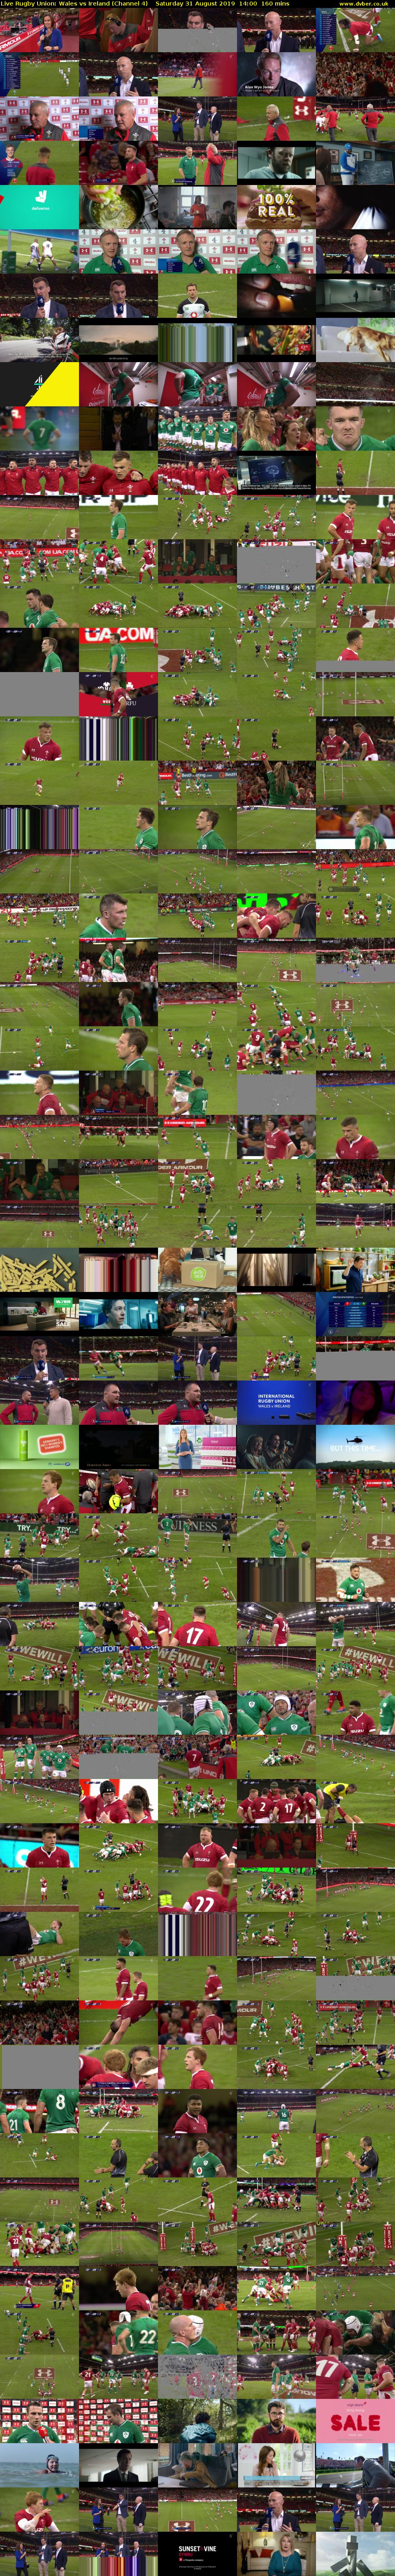 Live Rugby Union: Wales vs Ireland (Channel 4) Saturday 31 August 2019 14:00 - 16:40